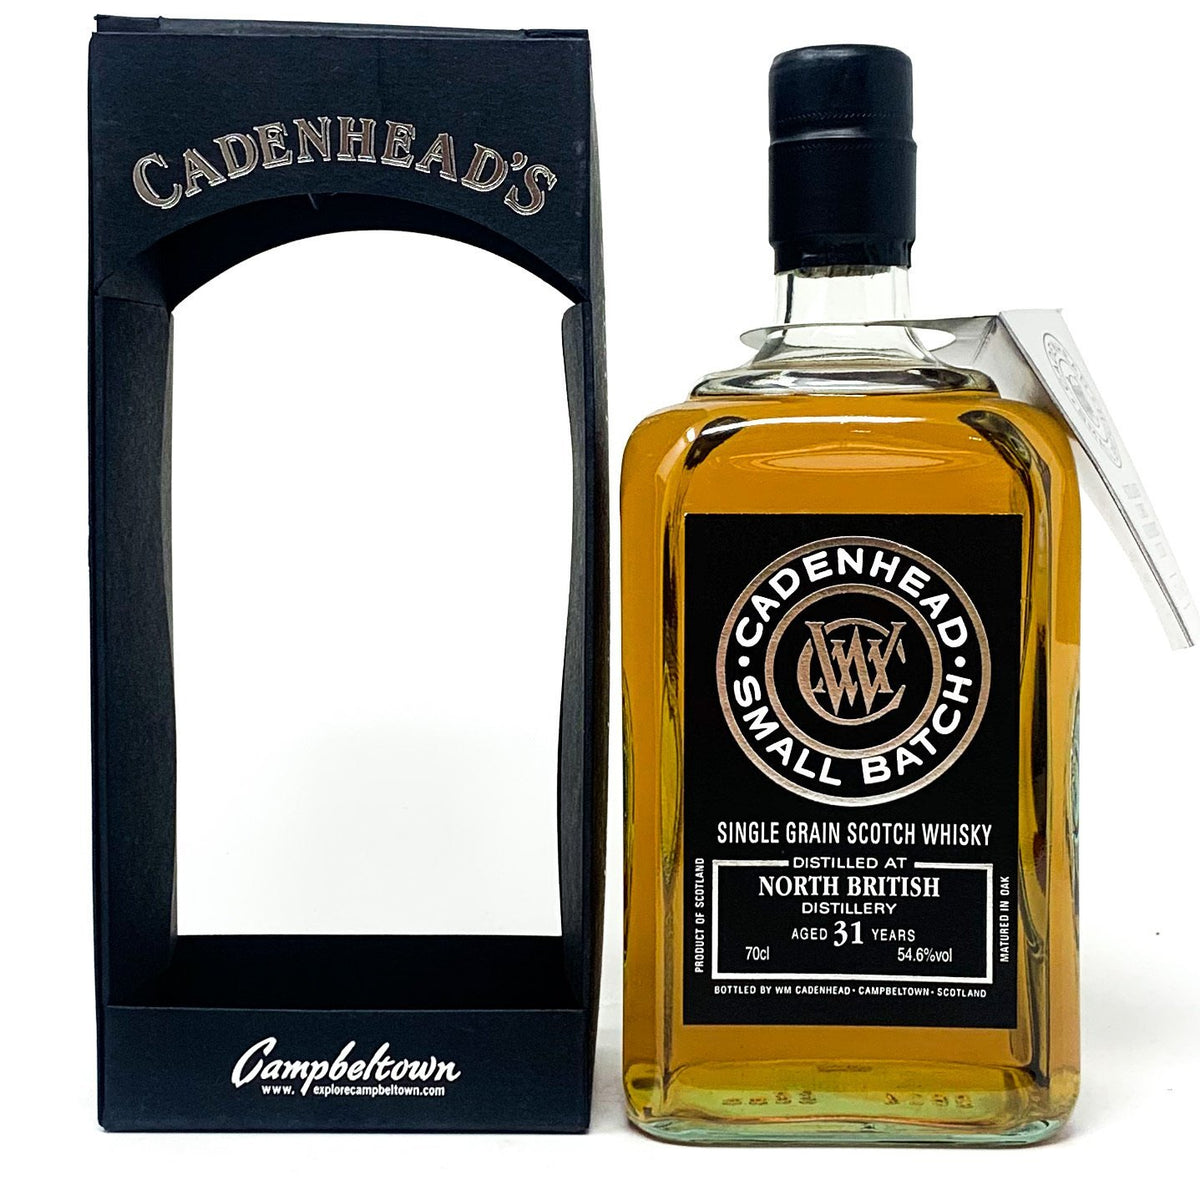 North British 31 Year Old Cadenhead's Single Grain Scotch Whisky, 70cl — Old and Rare Whisky